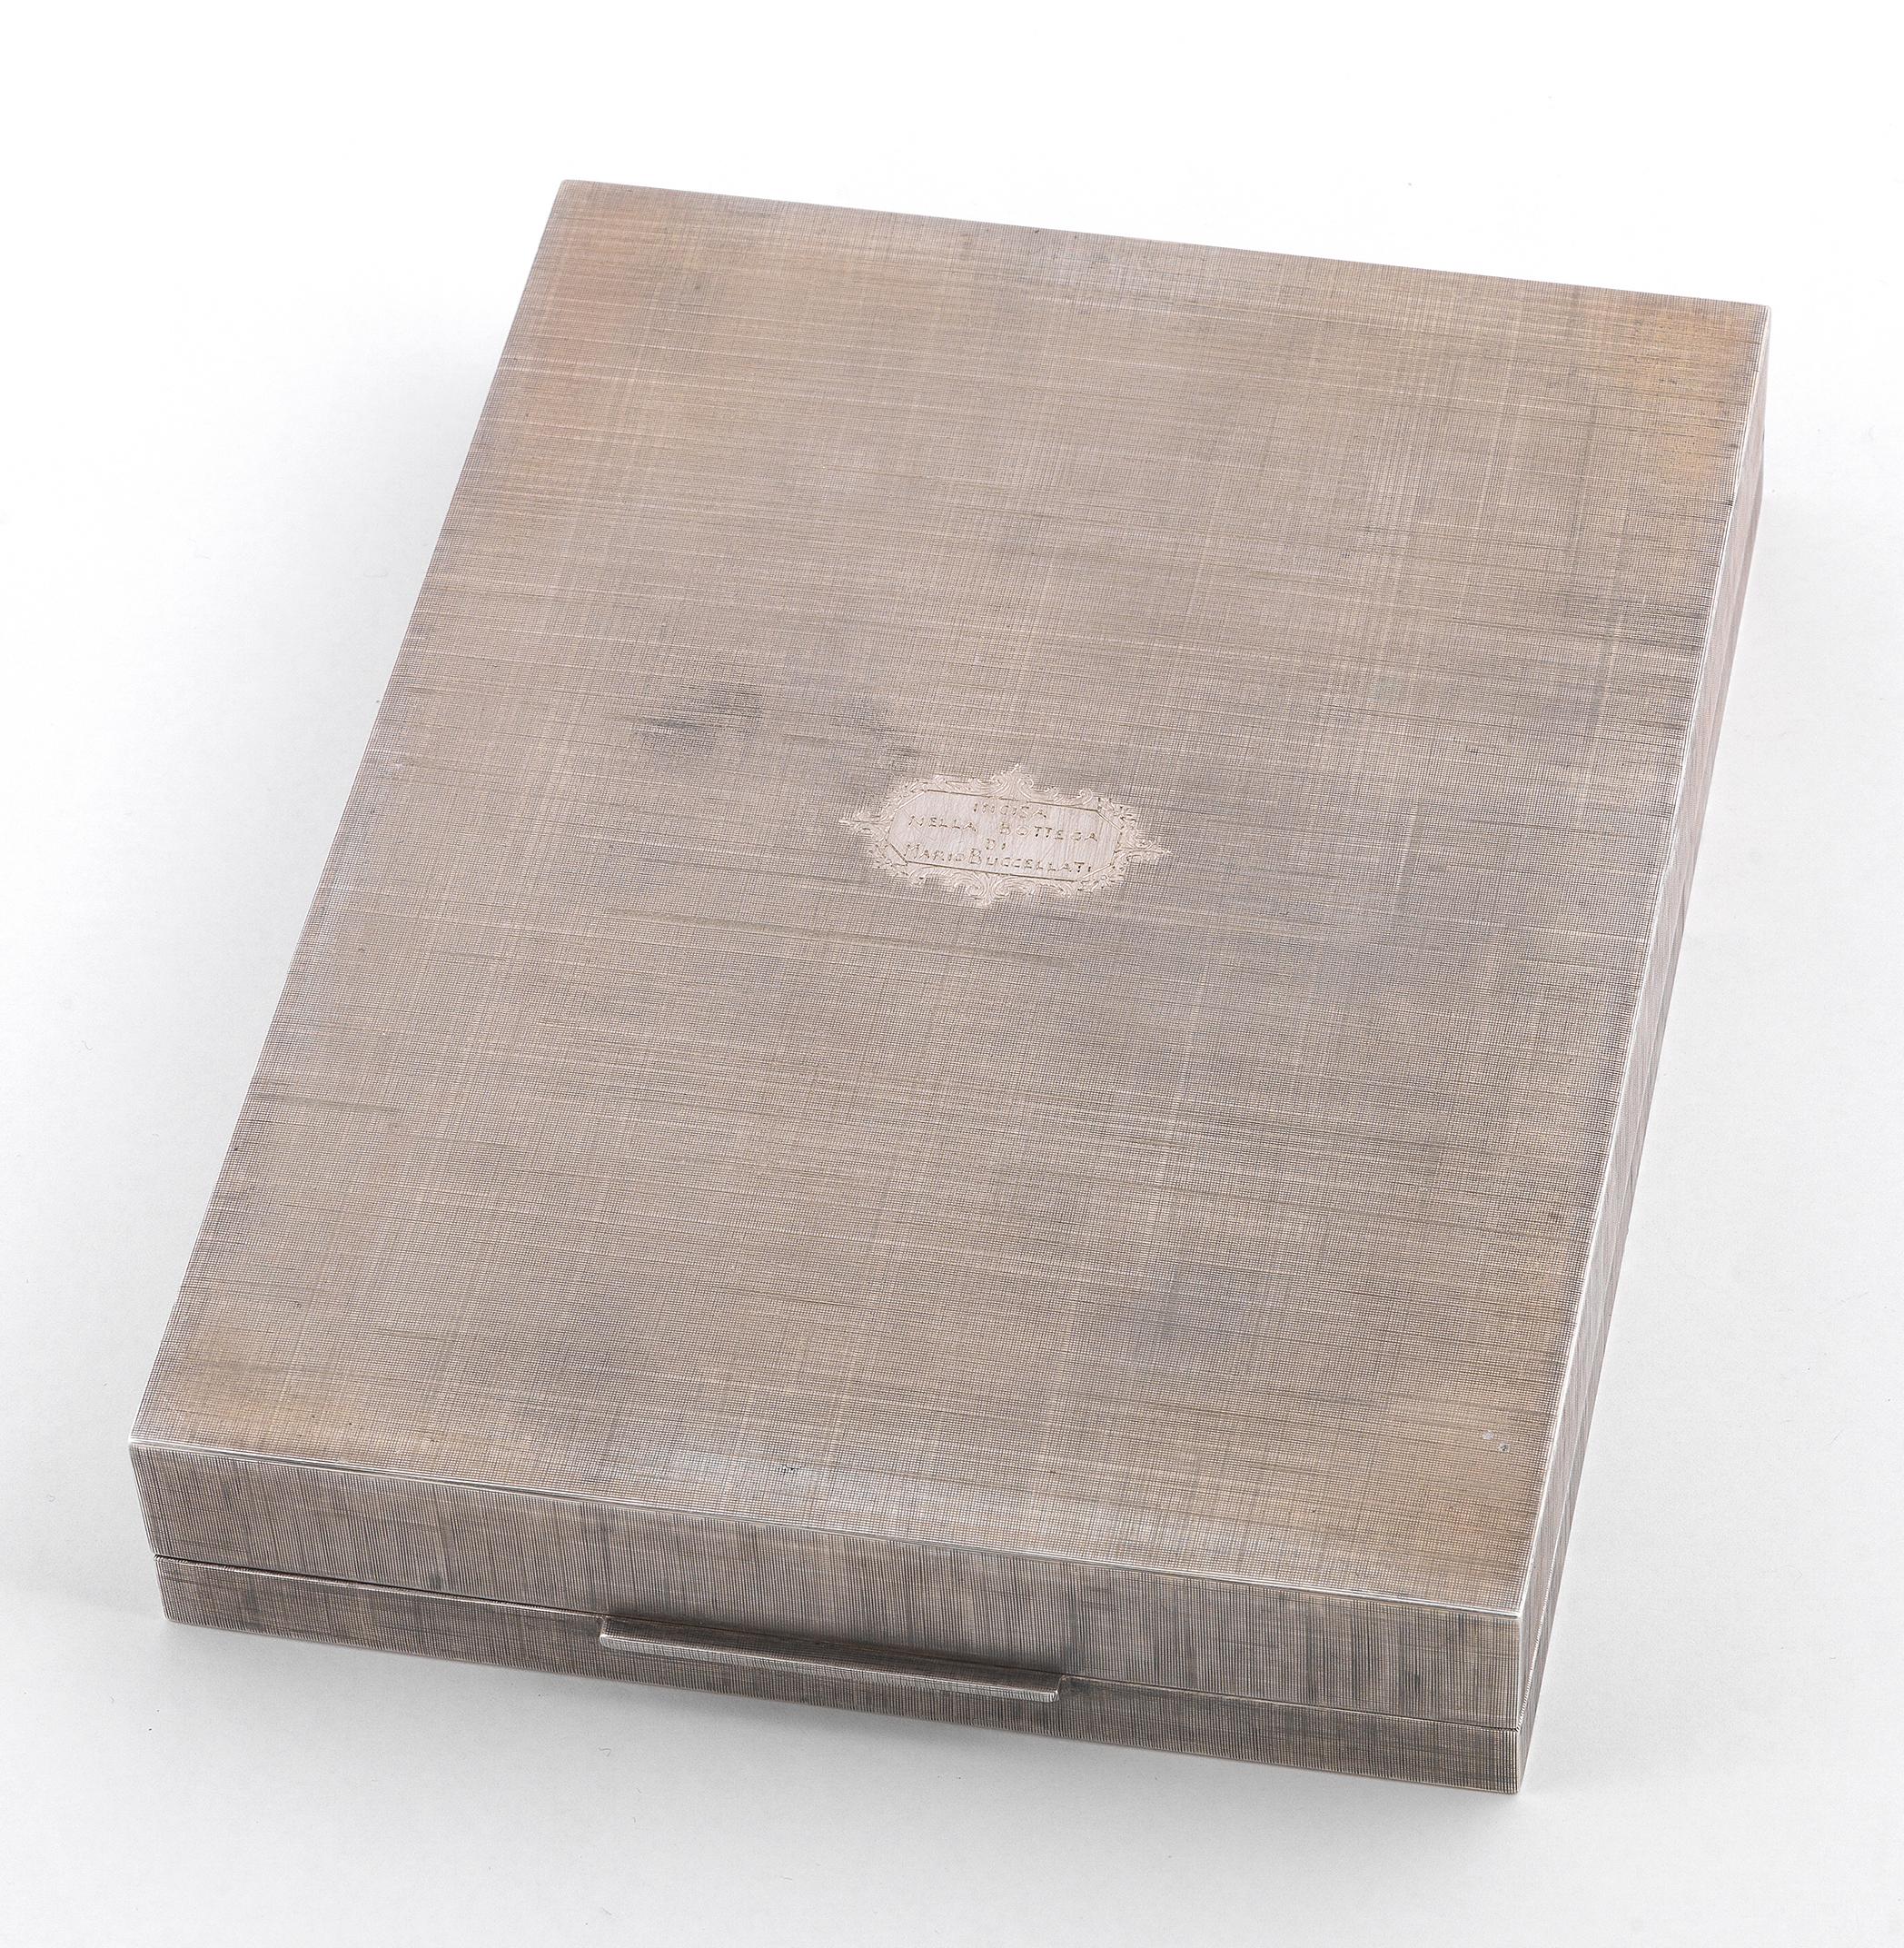 Rectangular form with matted textured surfaces, the hinged cover with etched MEDINA THE PROFHET'S MOSQUE, the front with ribbed thumb piece, polished interior with engraved dotted pattern, length 12cm x 16cm.